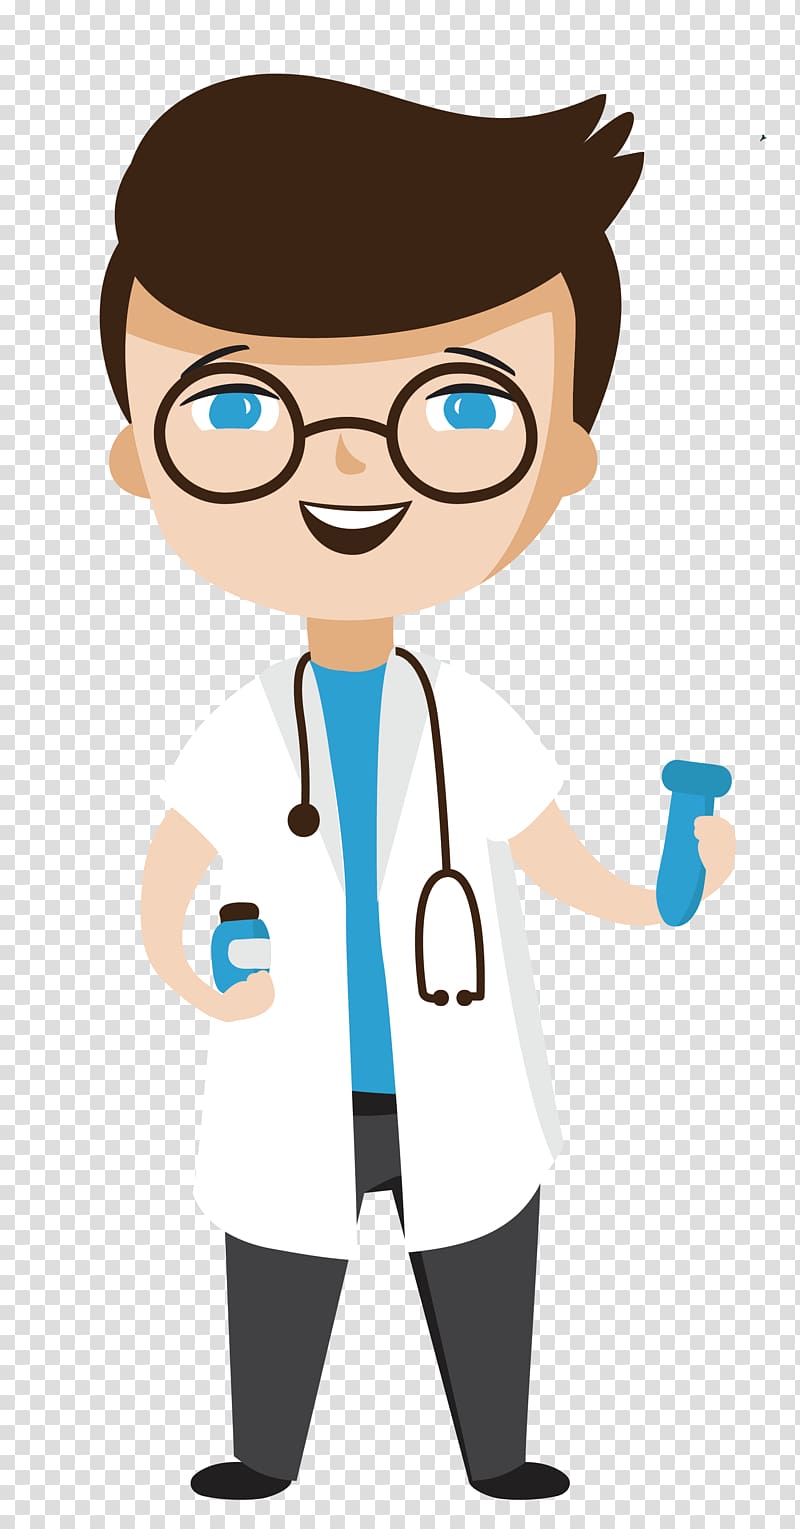 Cartoon Physician Illustration, Happy doctor transparent background PNG clipart